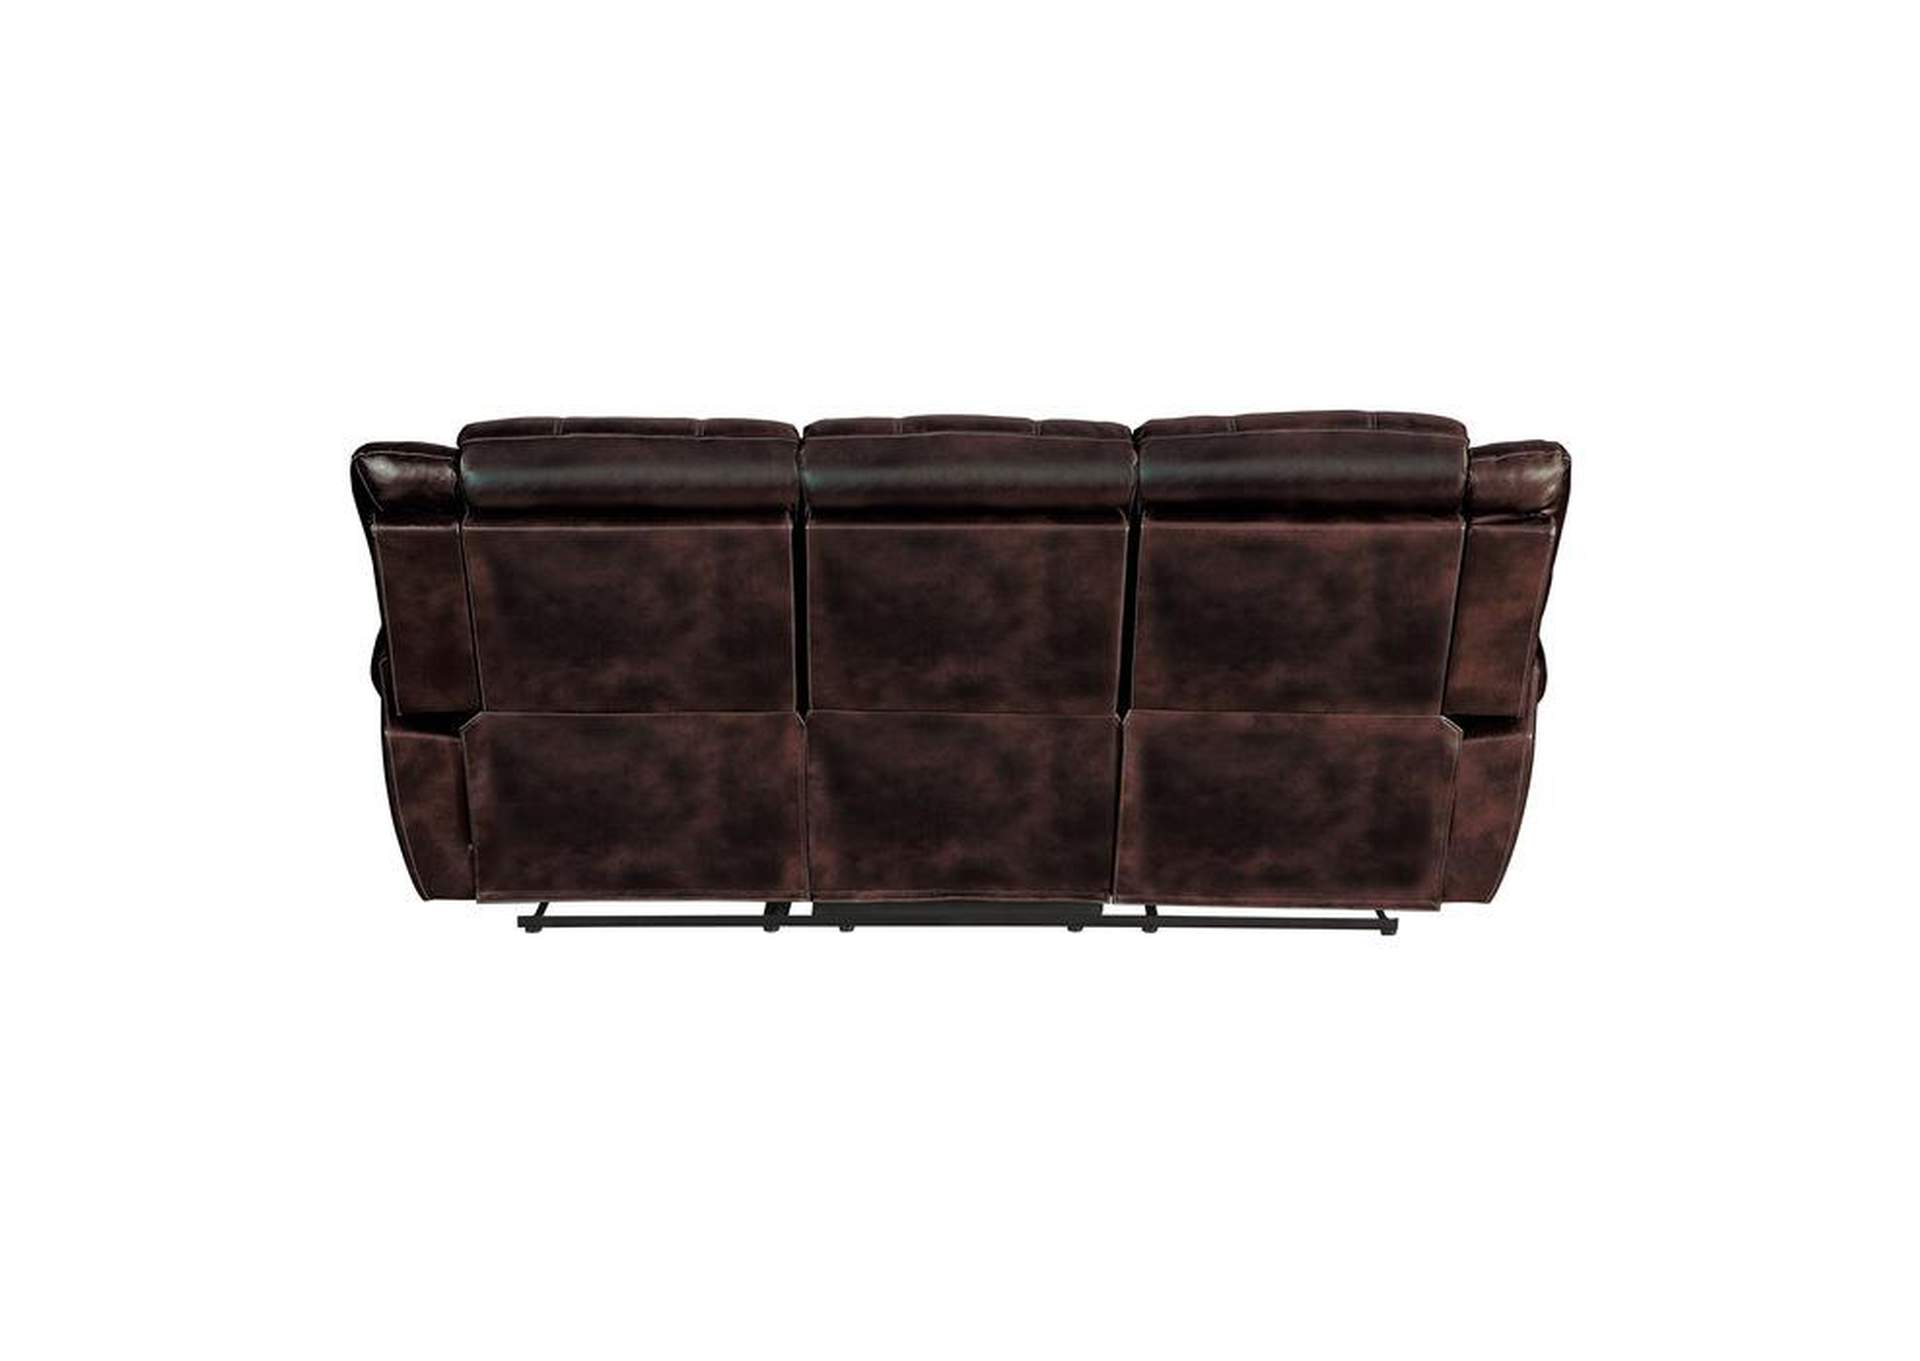 Hill Double Reclining Sofa,Homelegance